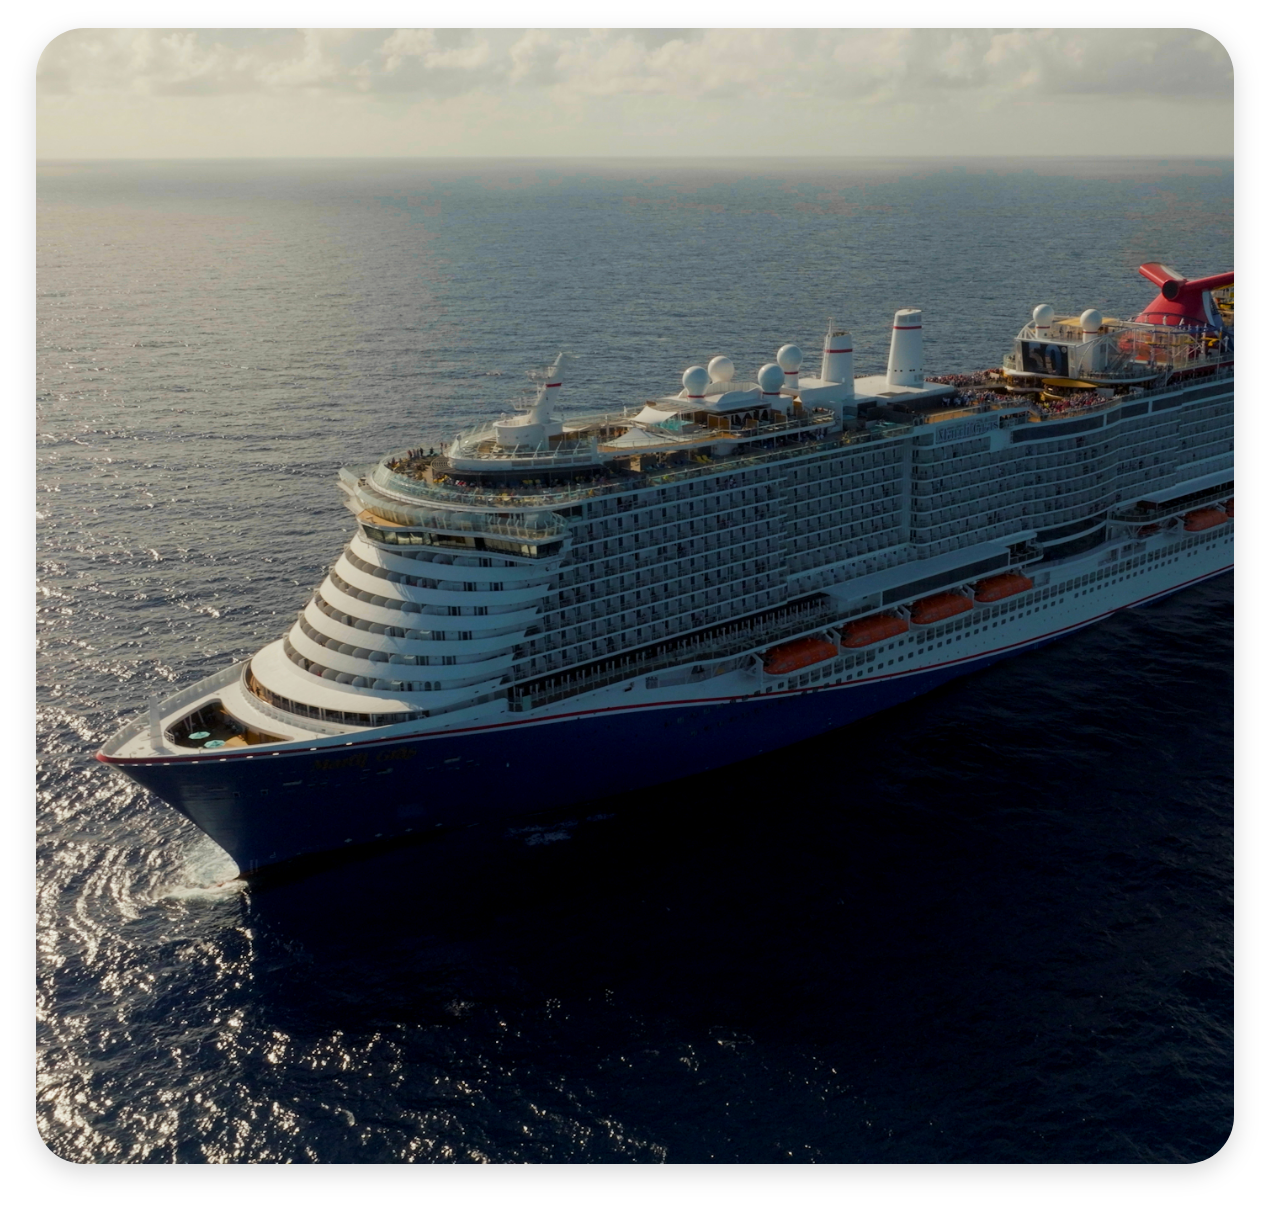 working at carnival cruise lines